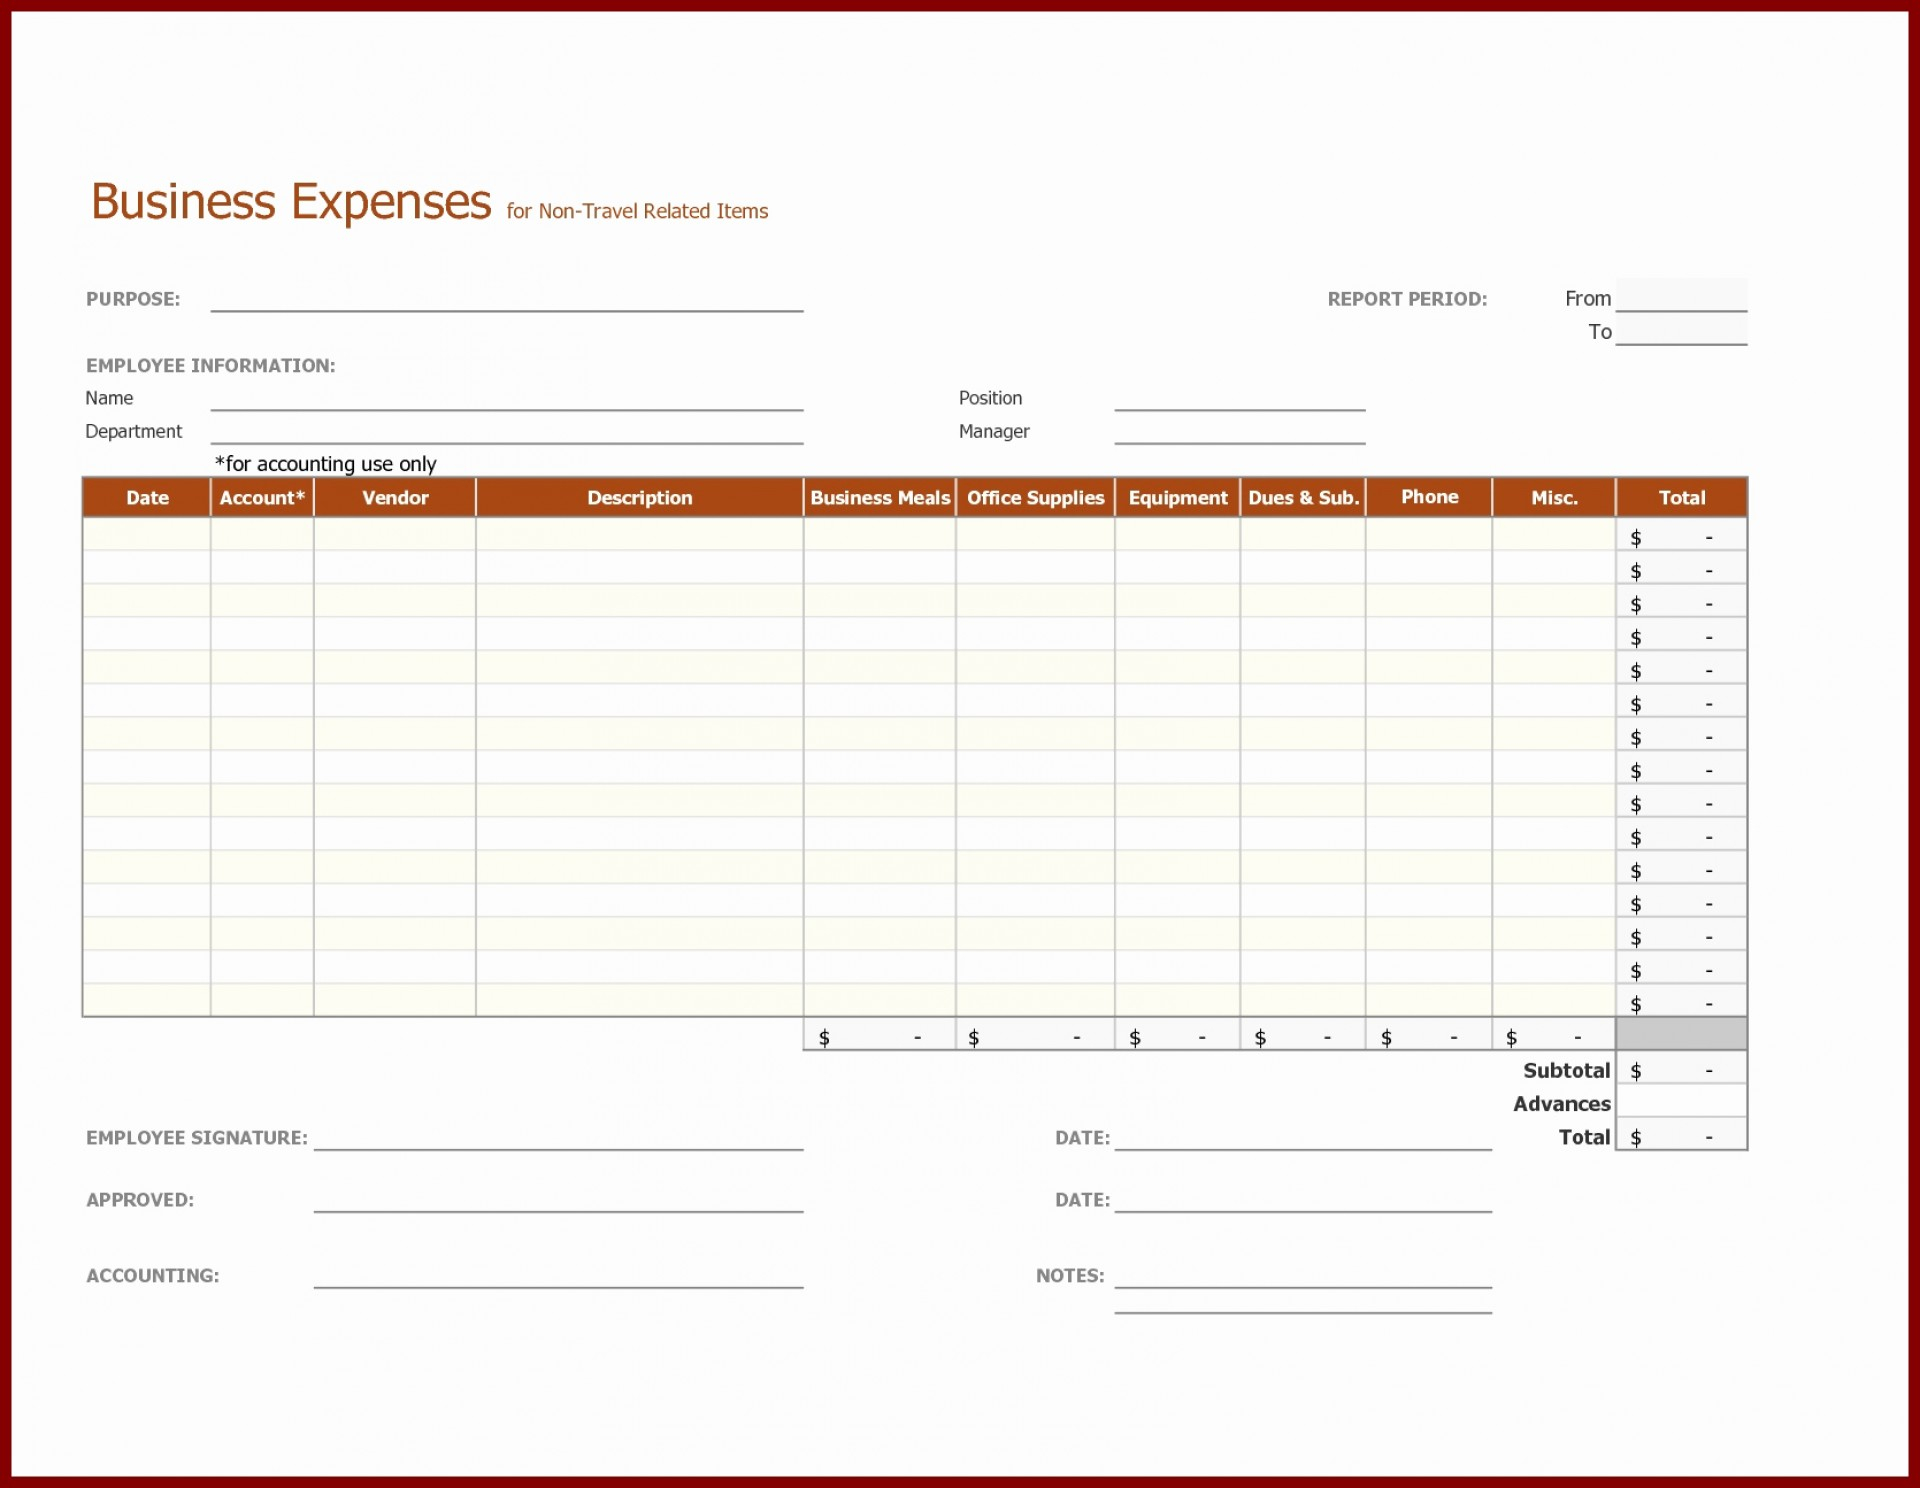 Form Templates Expense Report Business Template For Taxes Beautiful intended for Generic Expense Report